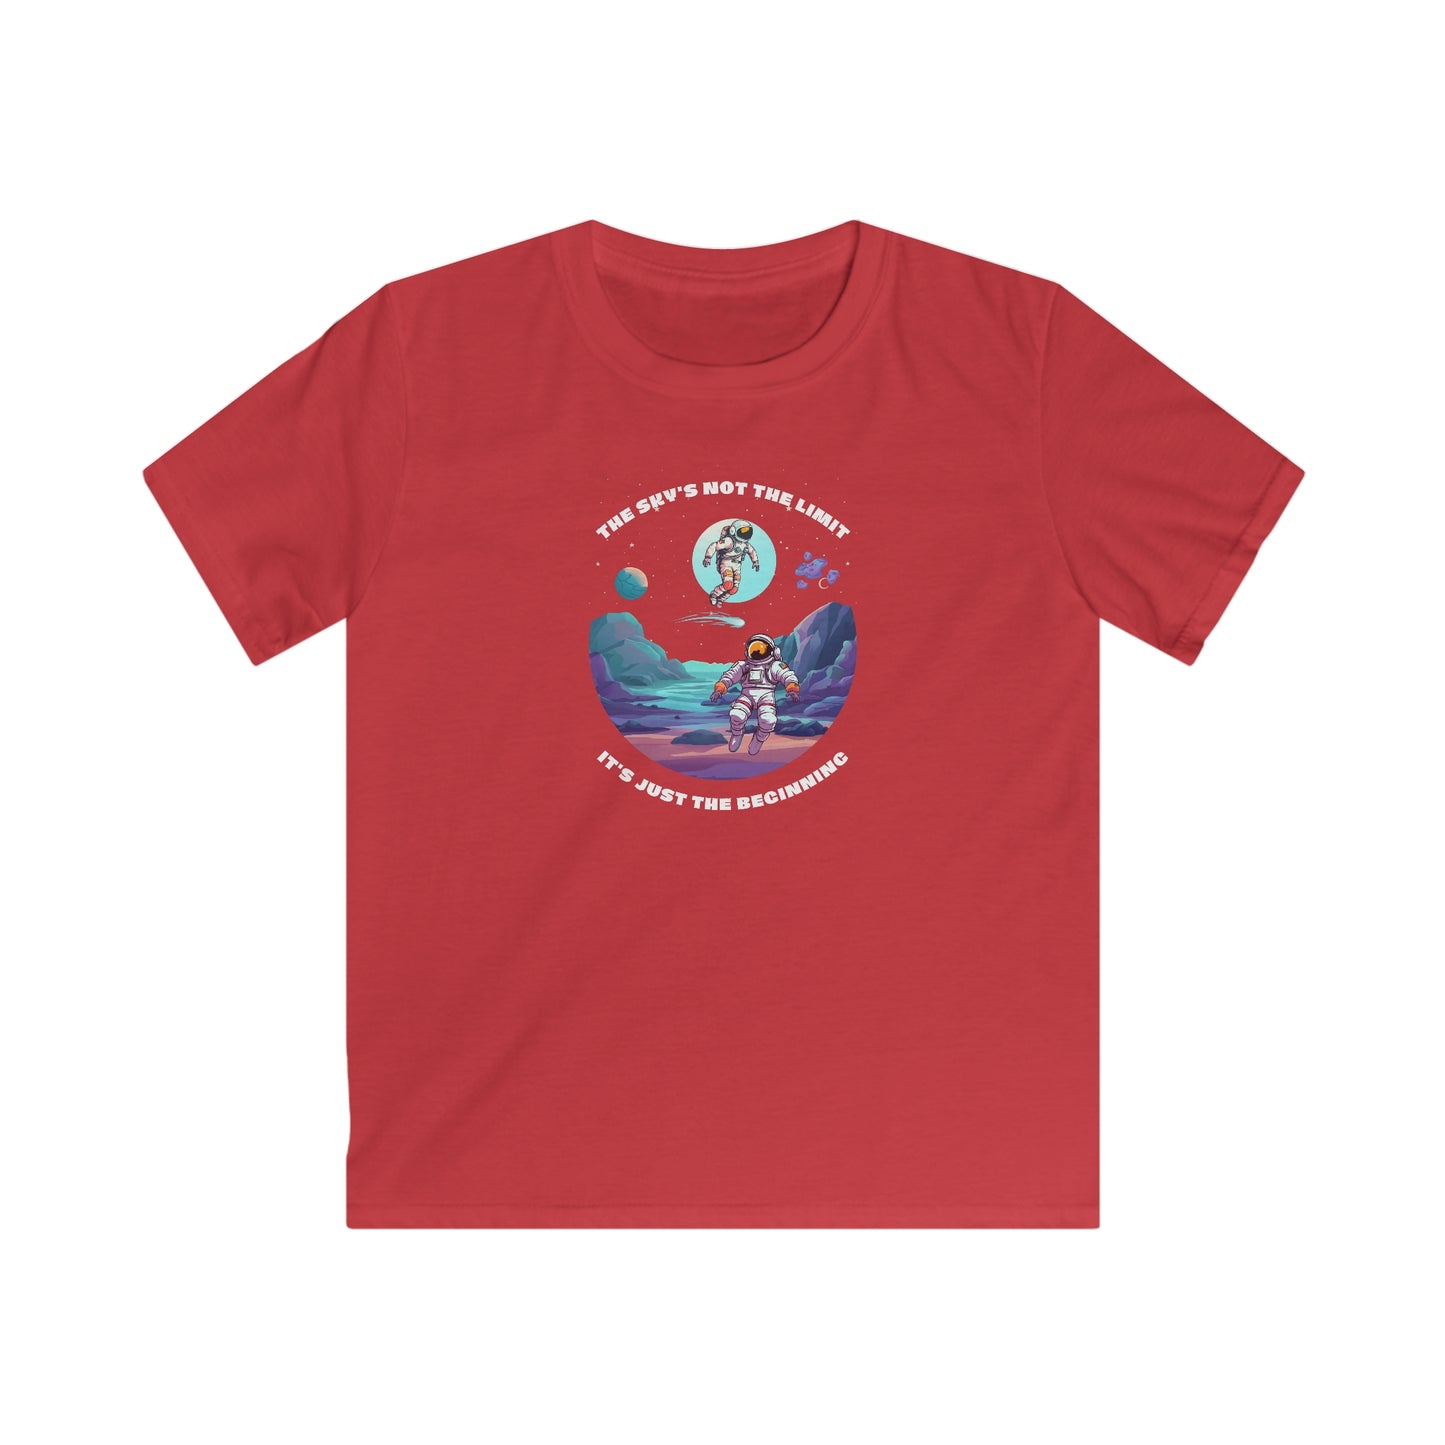 The Sky's Not The Limit. It's Just The Beginning. Kids Softstyle Tee